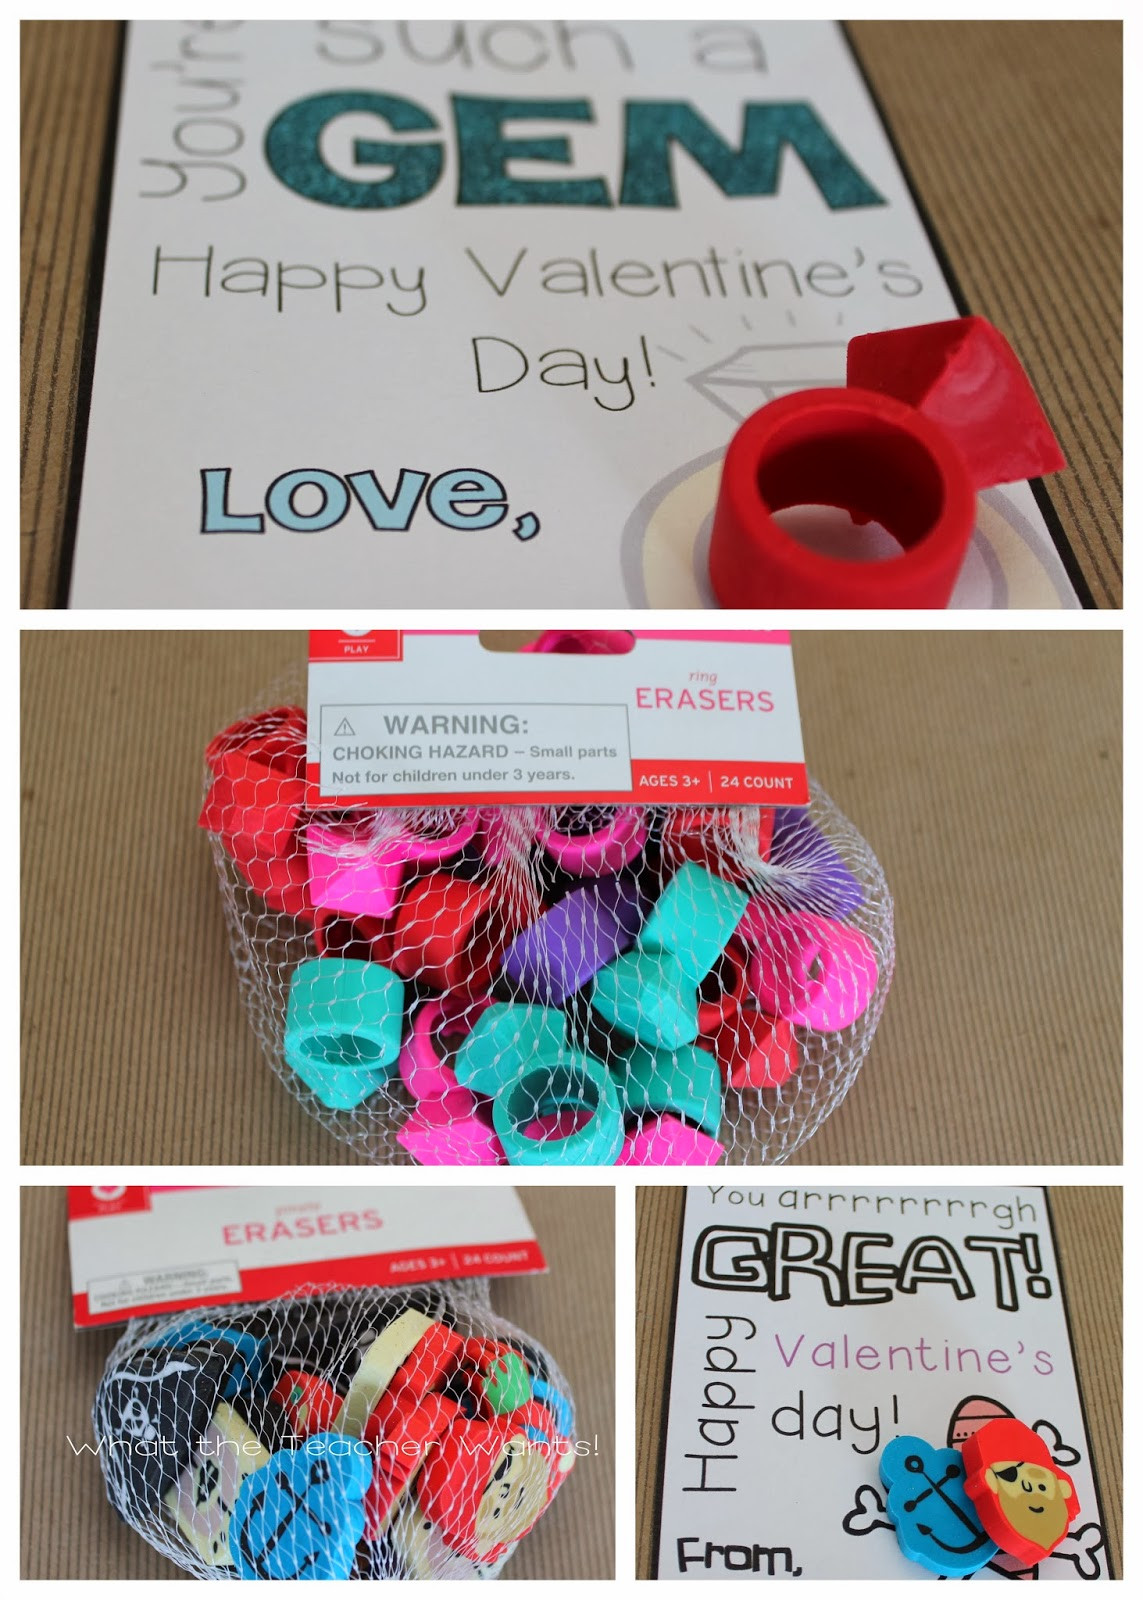 Valentine Day Gift Ideas Target
 What the Teacher Wants 13 Non Food Valentine Ideas with